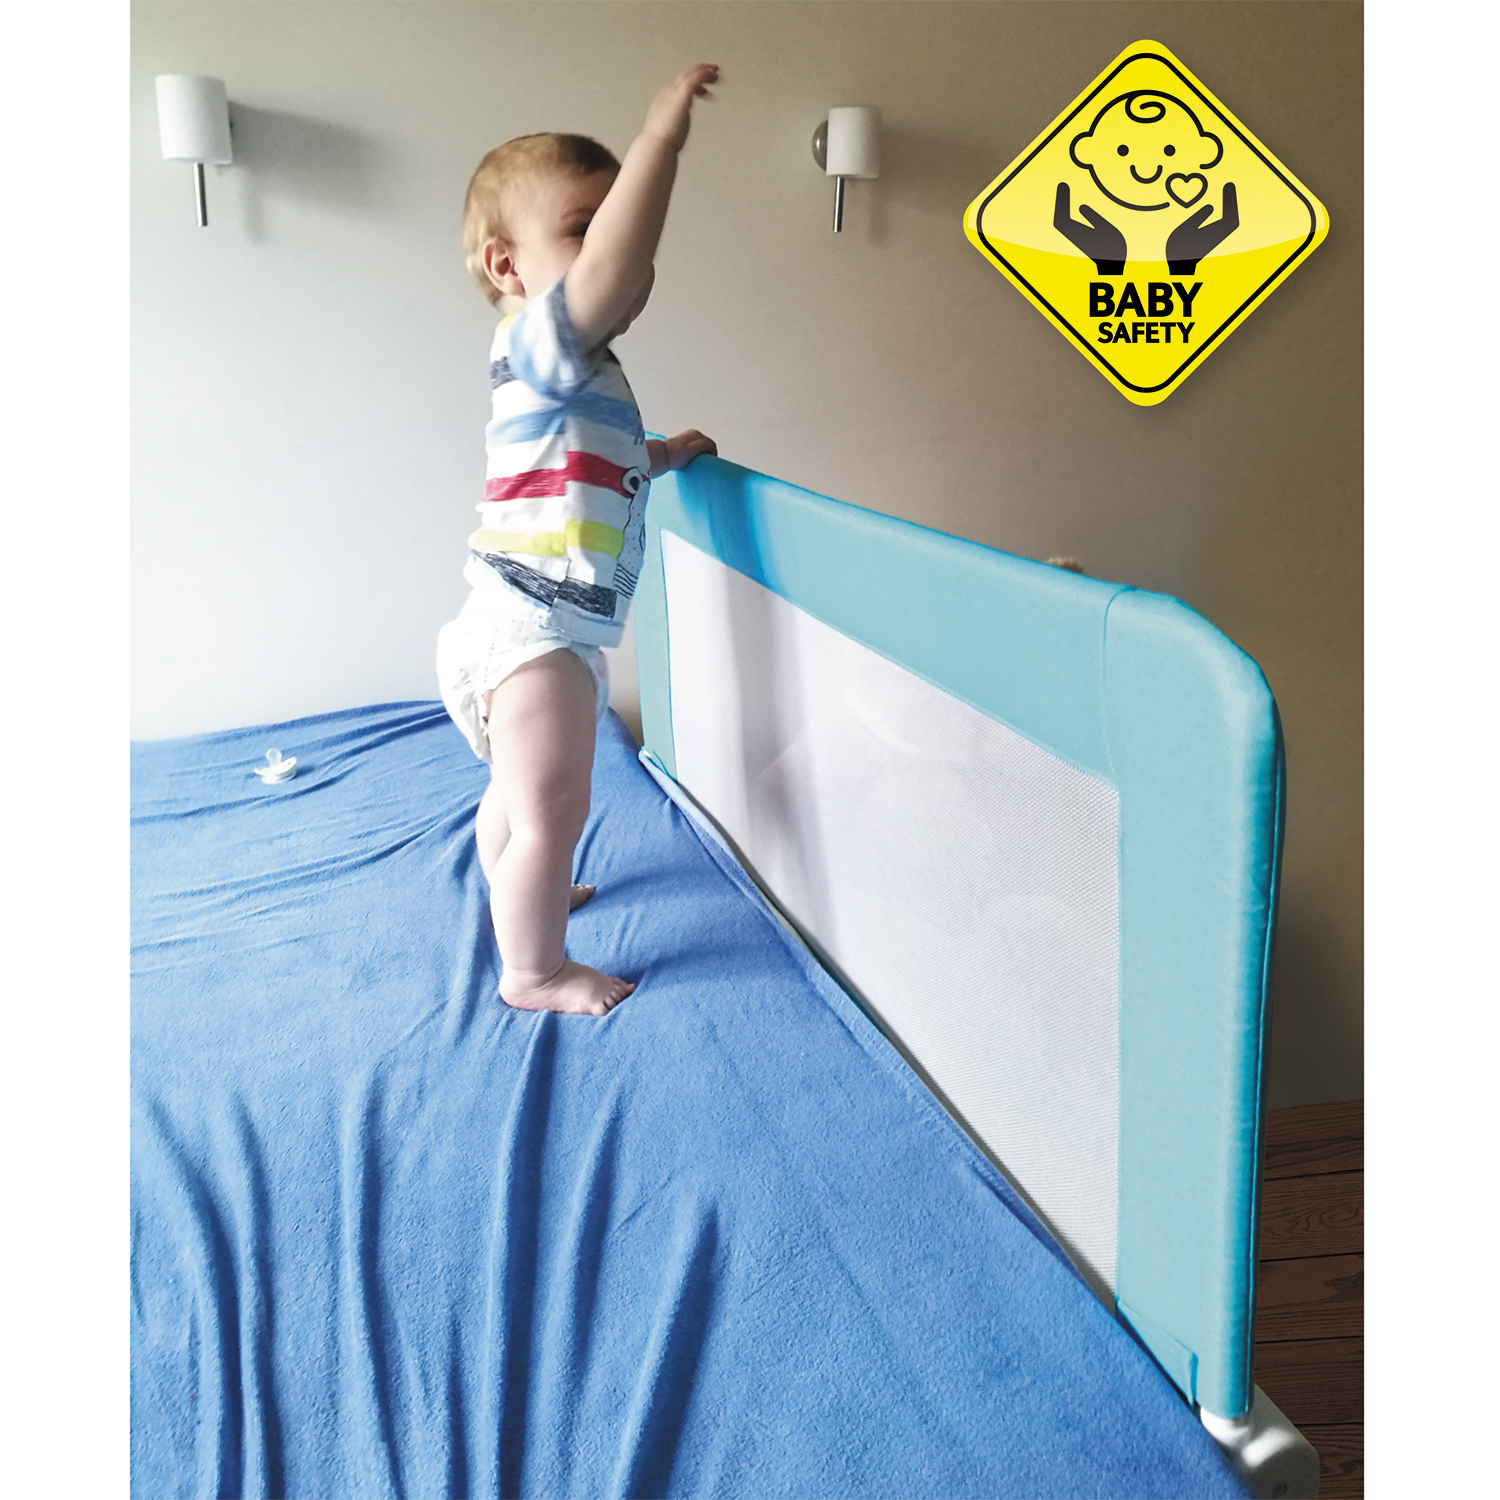 Tatkraft Guard Baby Bed Rail Foldable 120 cm Easy Fit Baby Safety Tall Bed Guard Rail for Toddlers/Kids/Children Pink Color Sturdy and Solid 